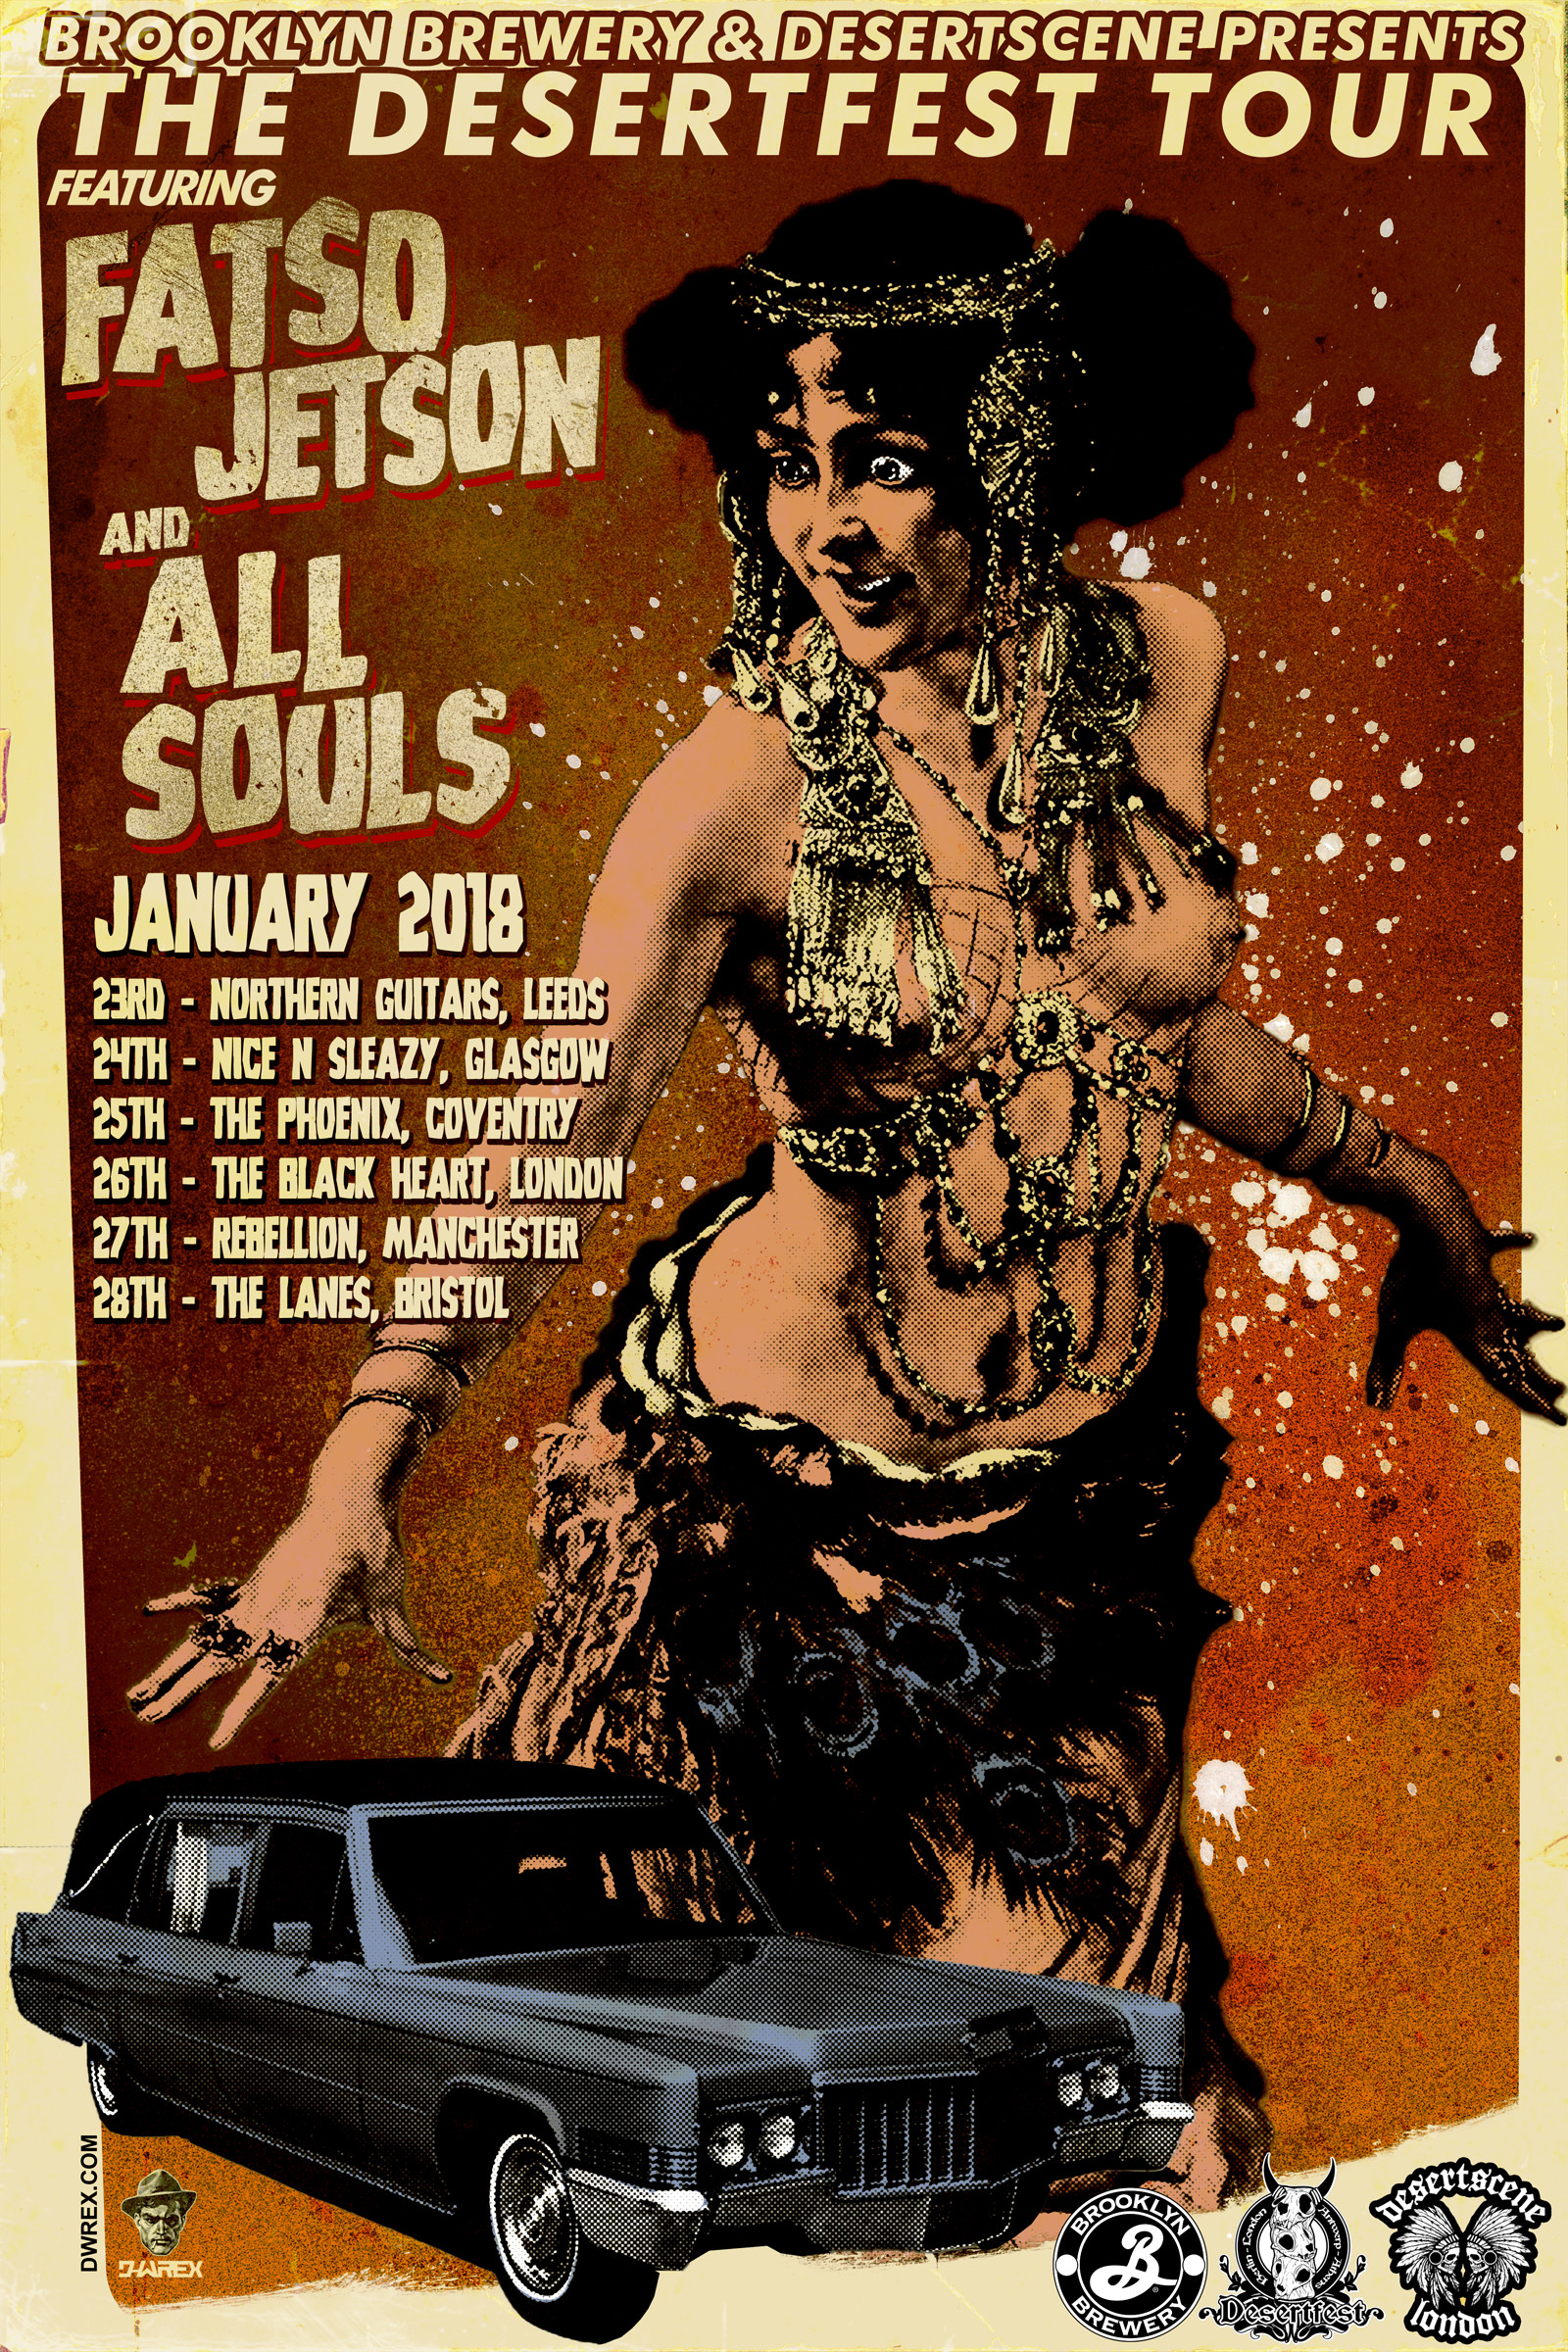 Fatso Jetson // All Soul // Groundhogs at The Lanes